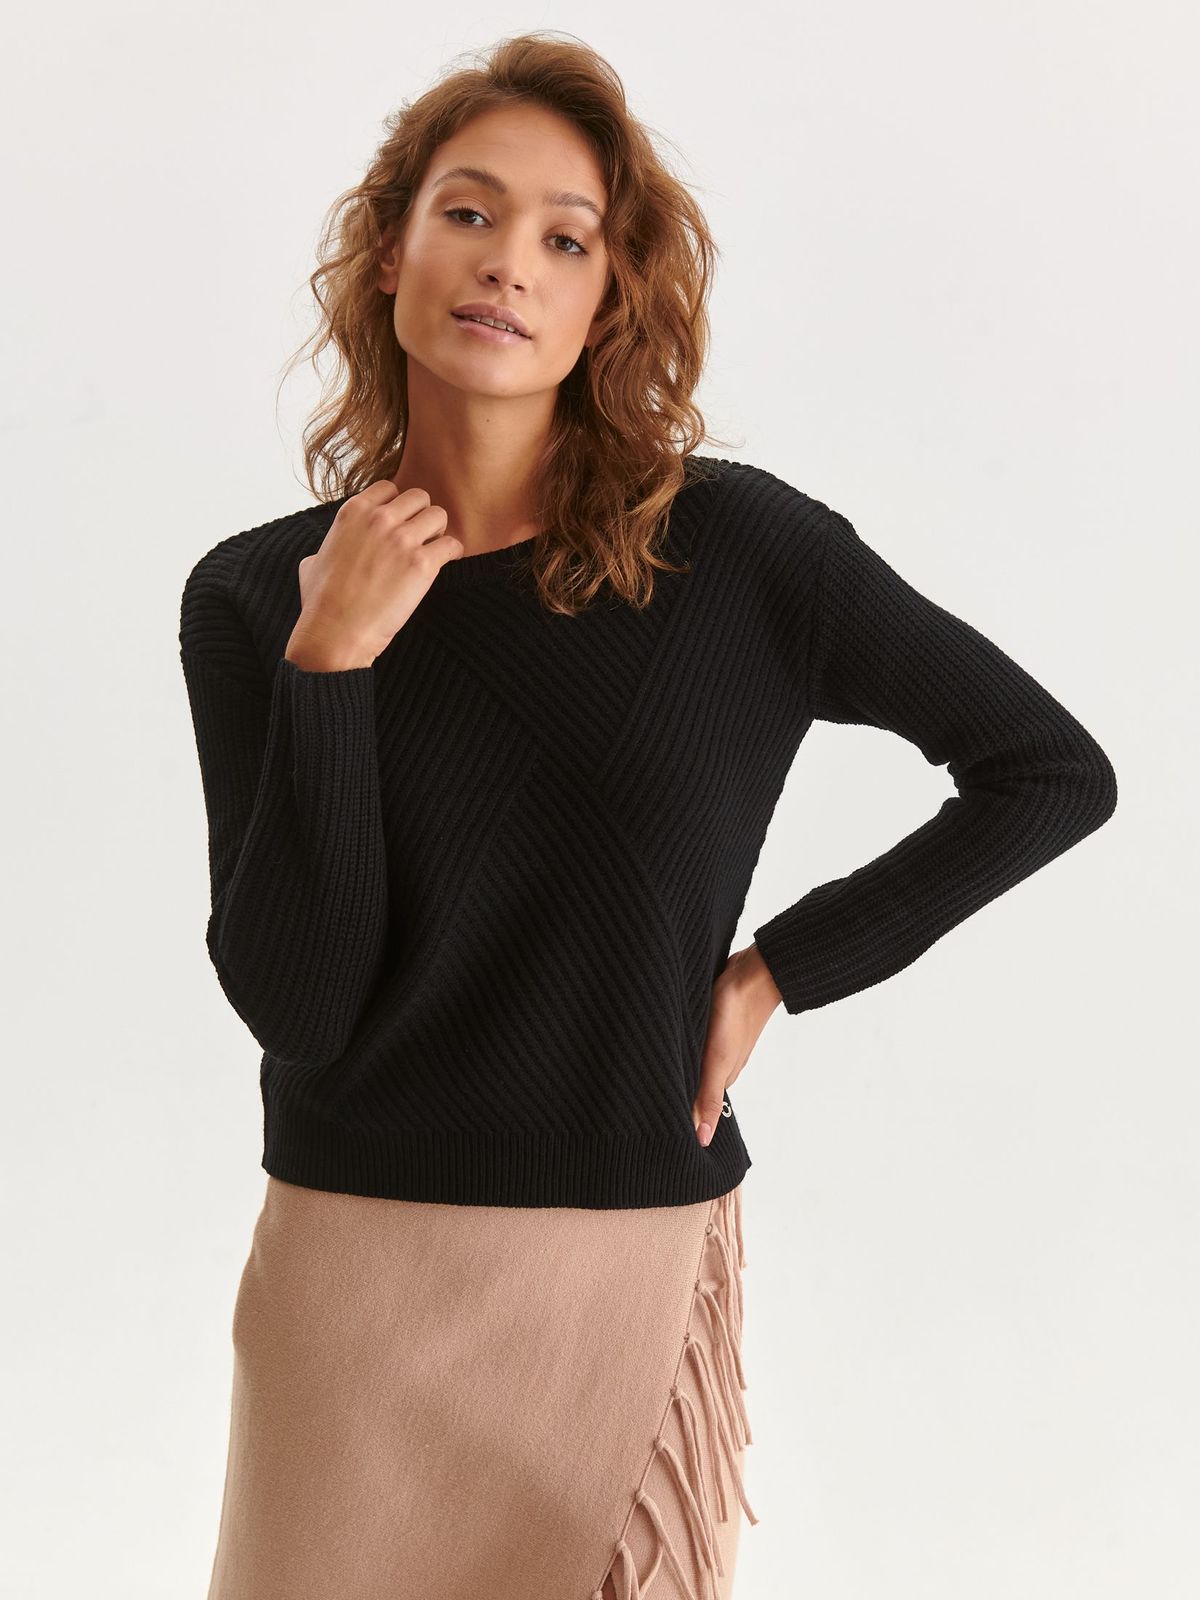 Black sweater tented knitted with rounded cleavage